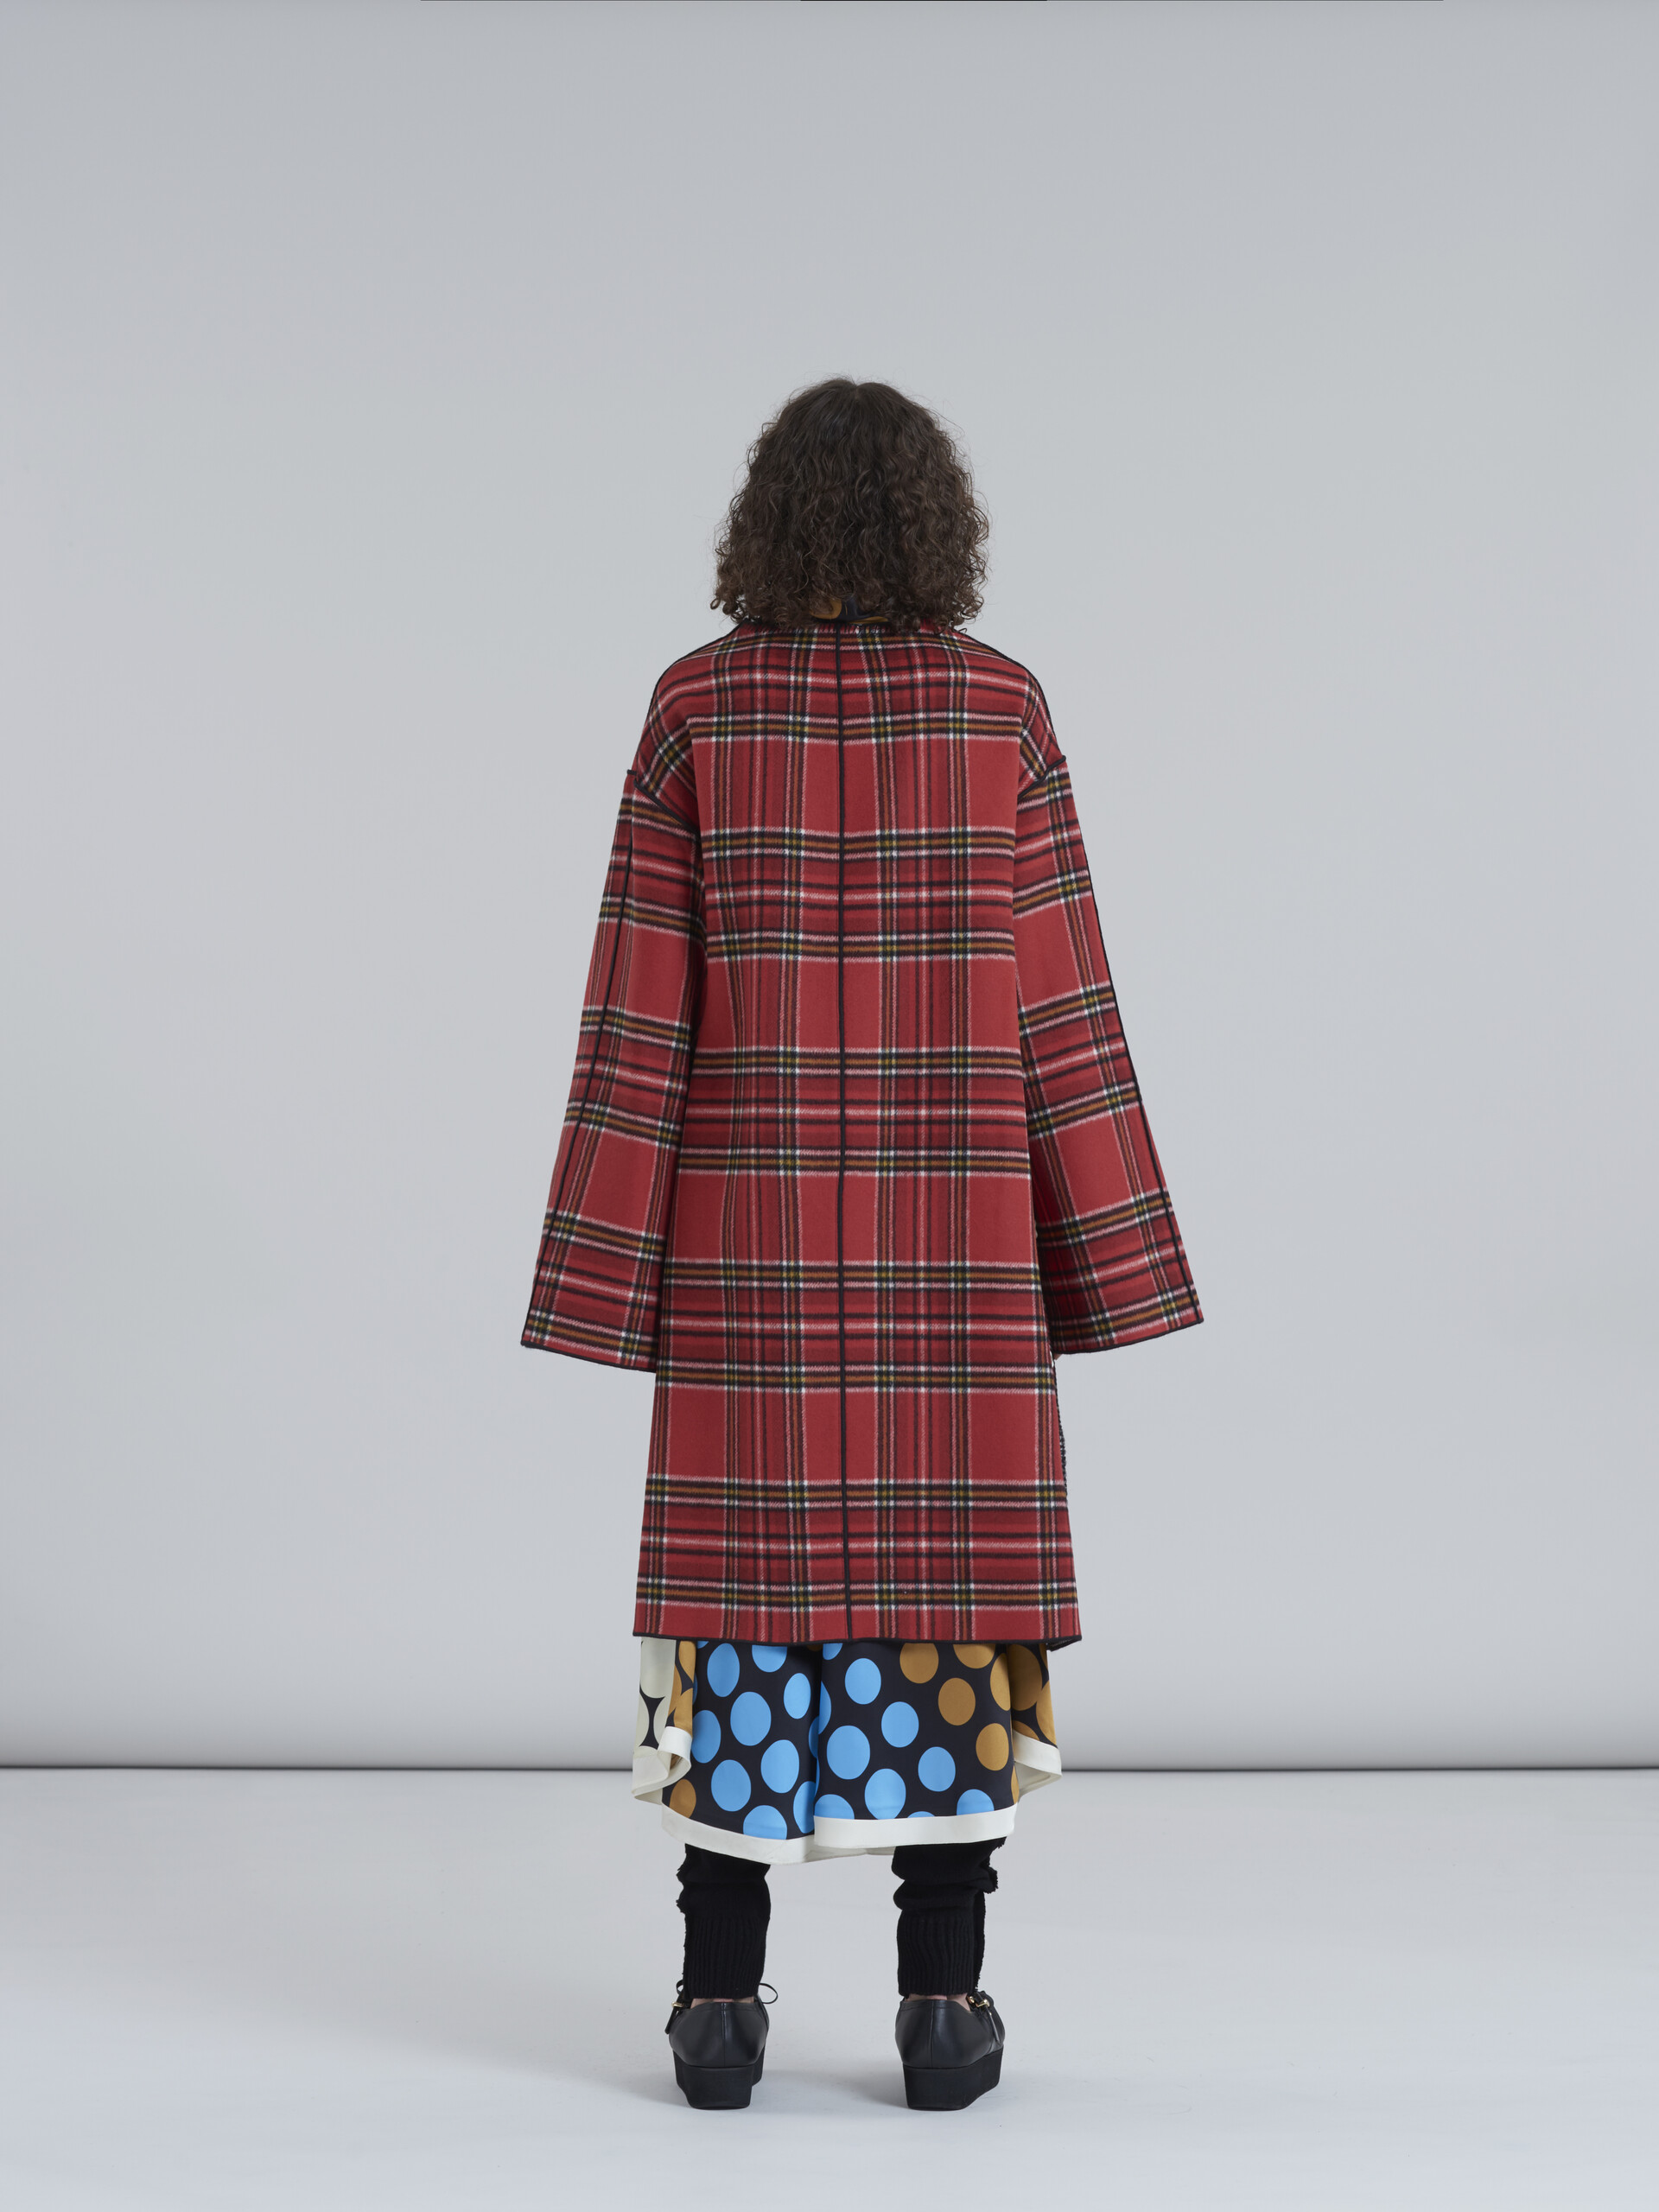 Double face melton wool coat with contrast inside - Coat - Image 3